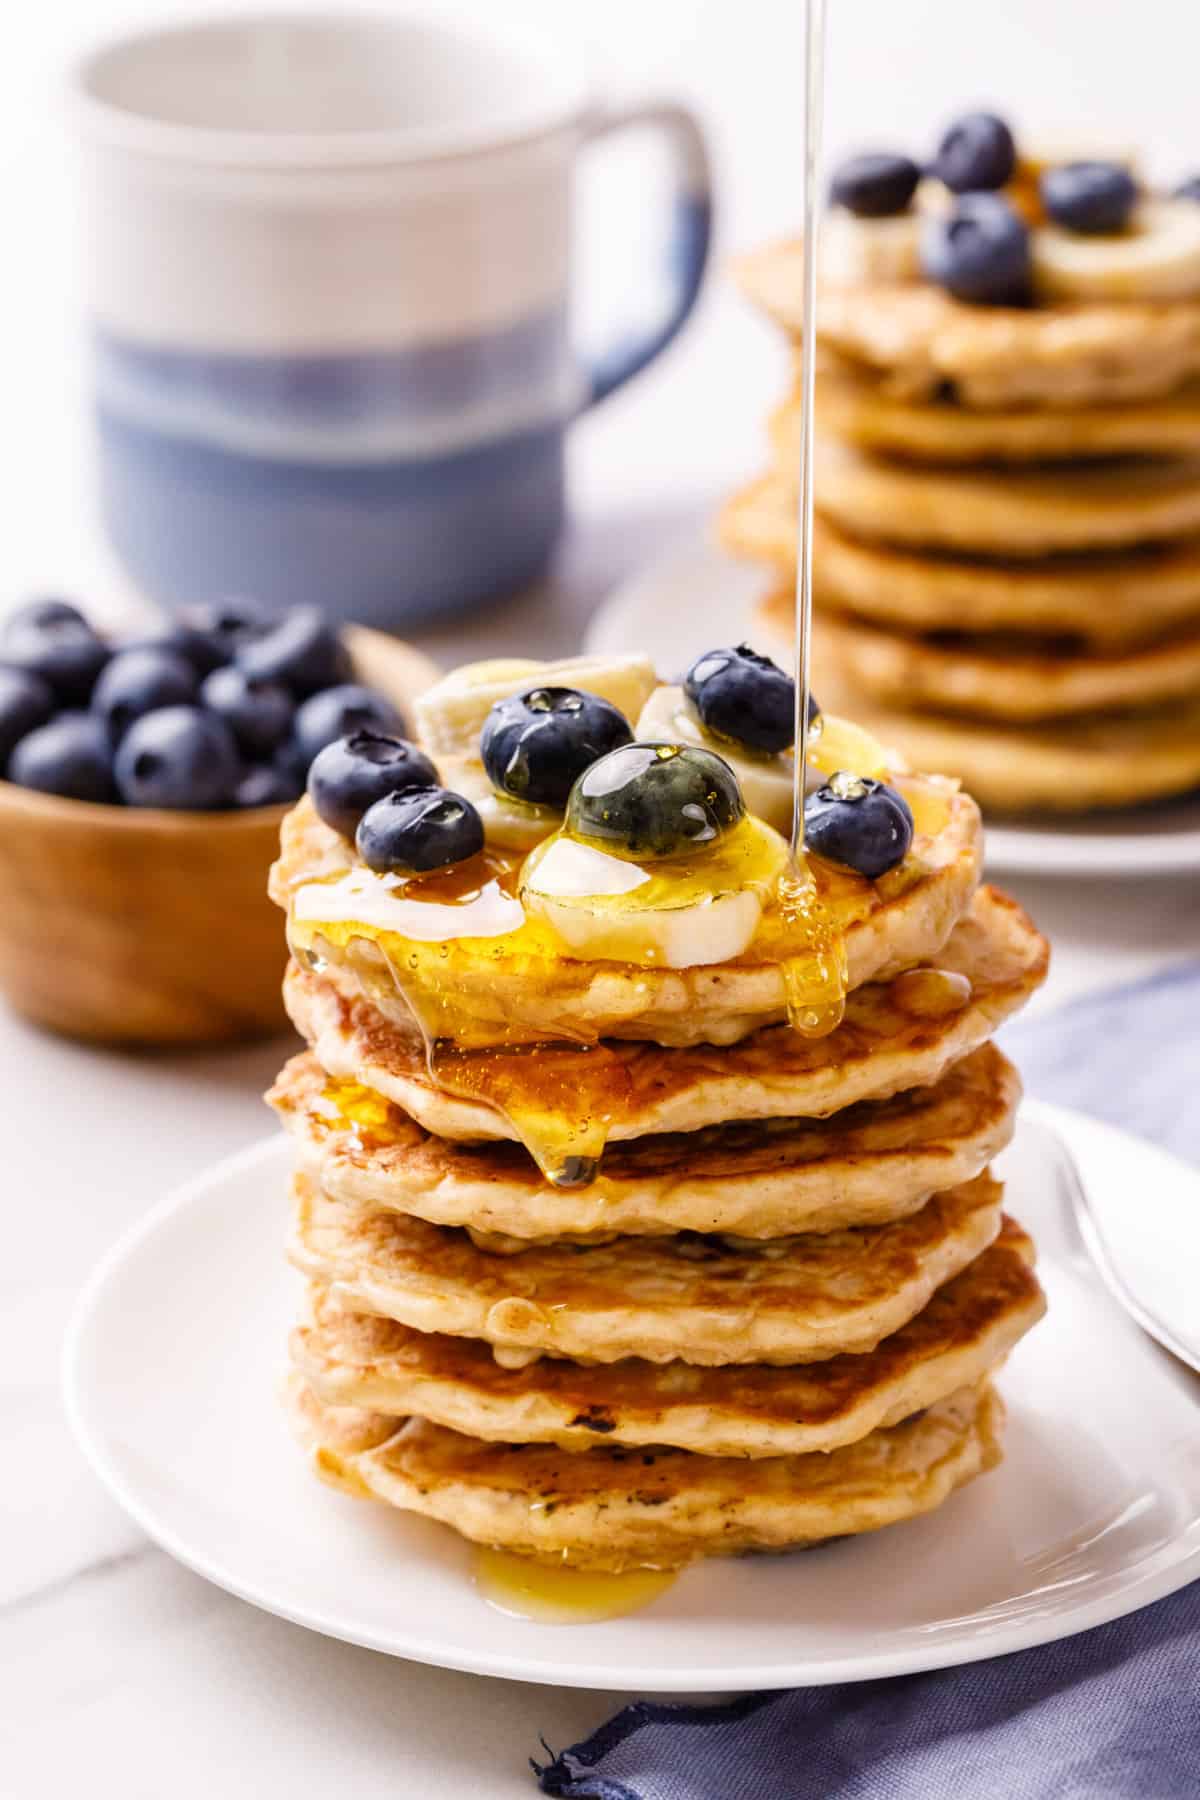 maple syrup poured on a stack a oatmeal pancakes topped with fresh blueberries and sliced bananas and served on a white round plate